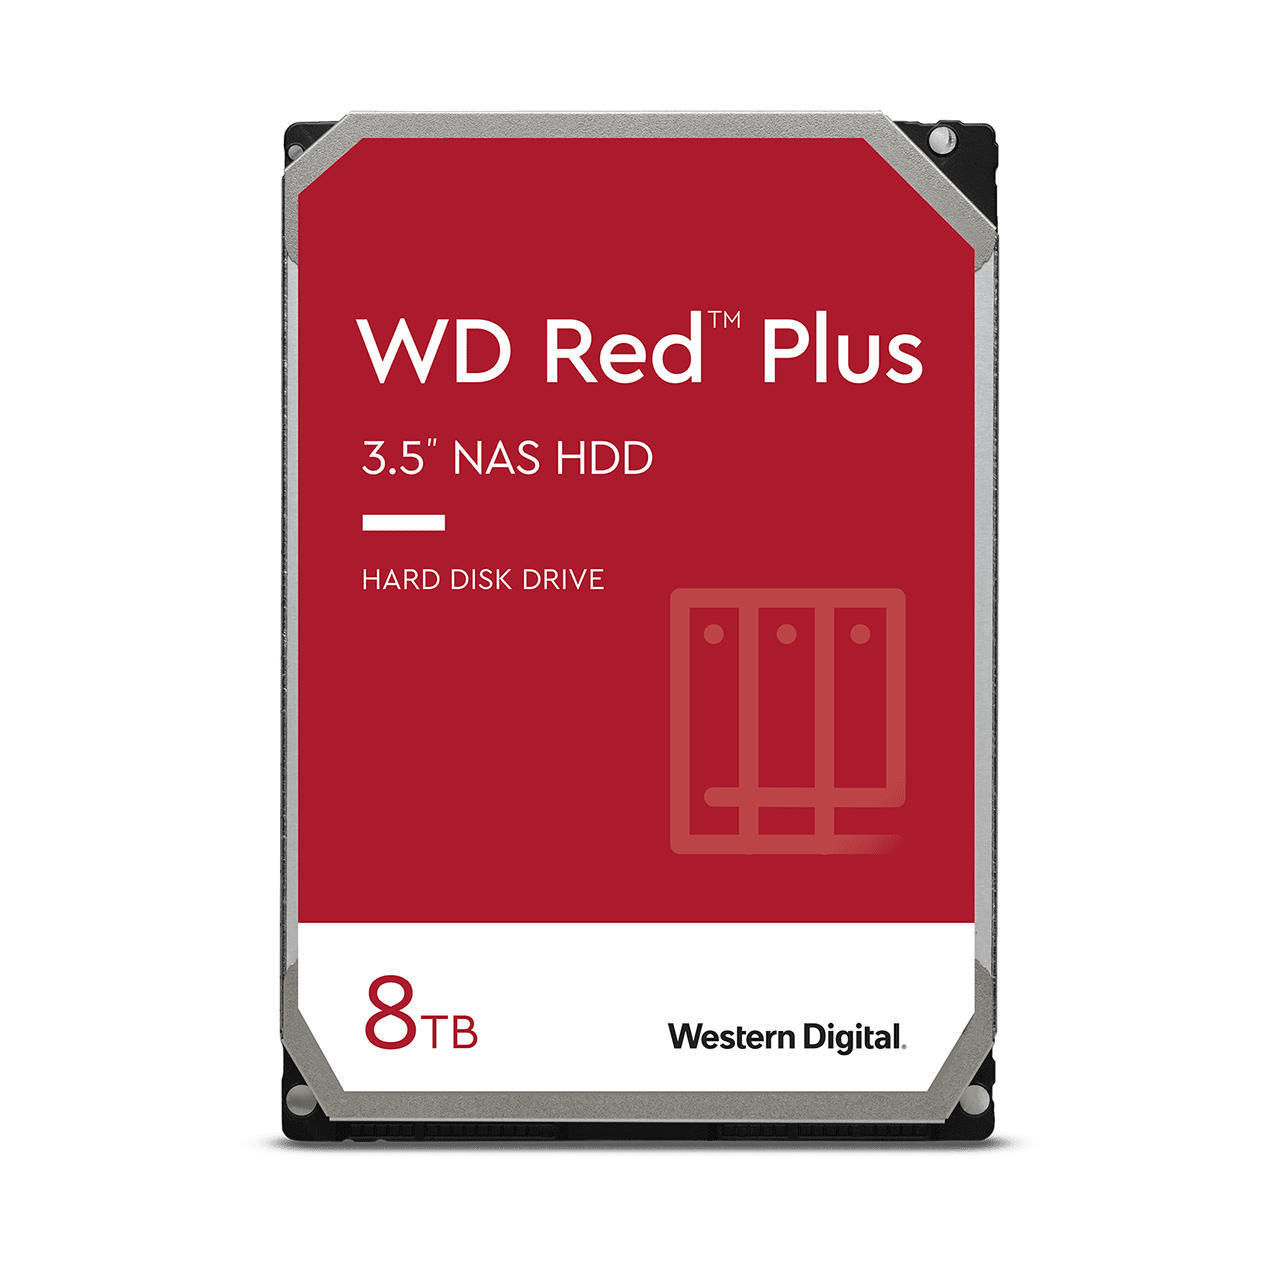 WD Red Plus 8TB WD80EFZZ